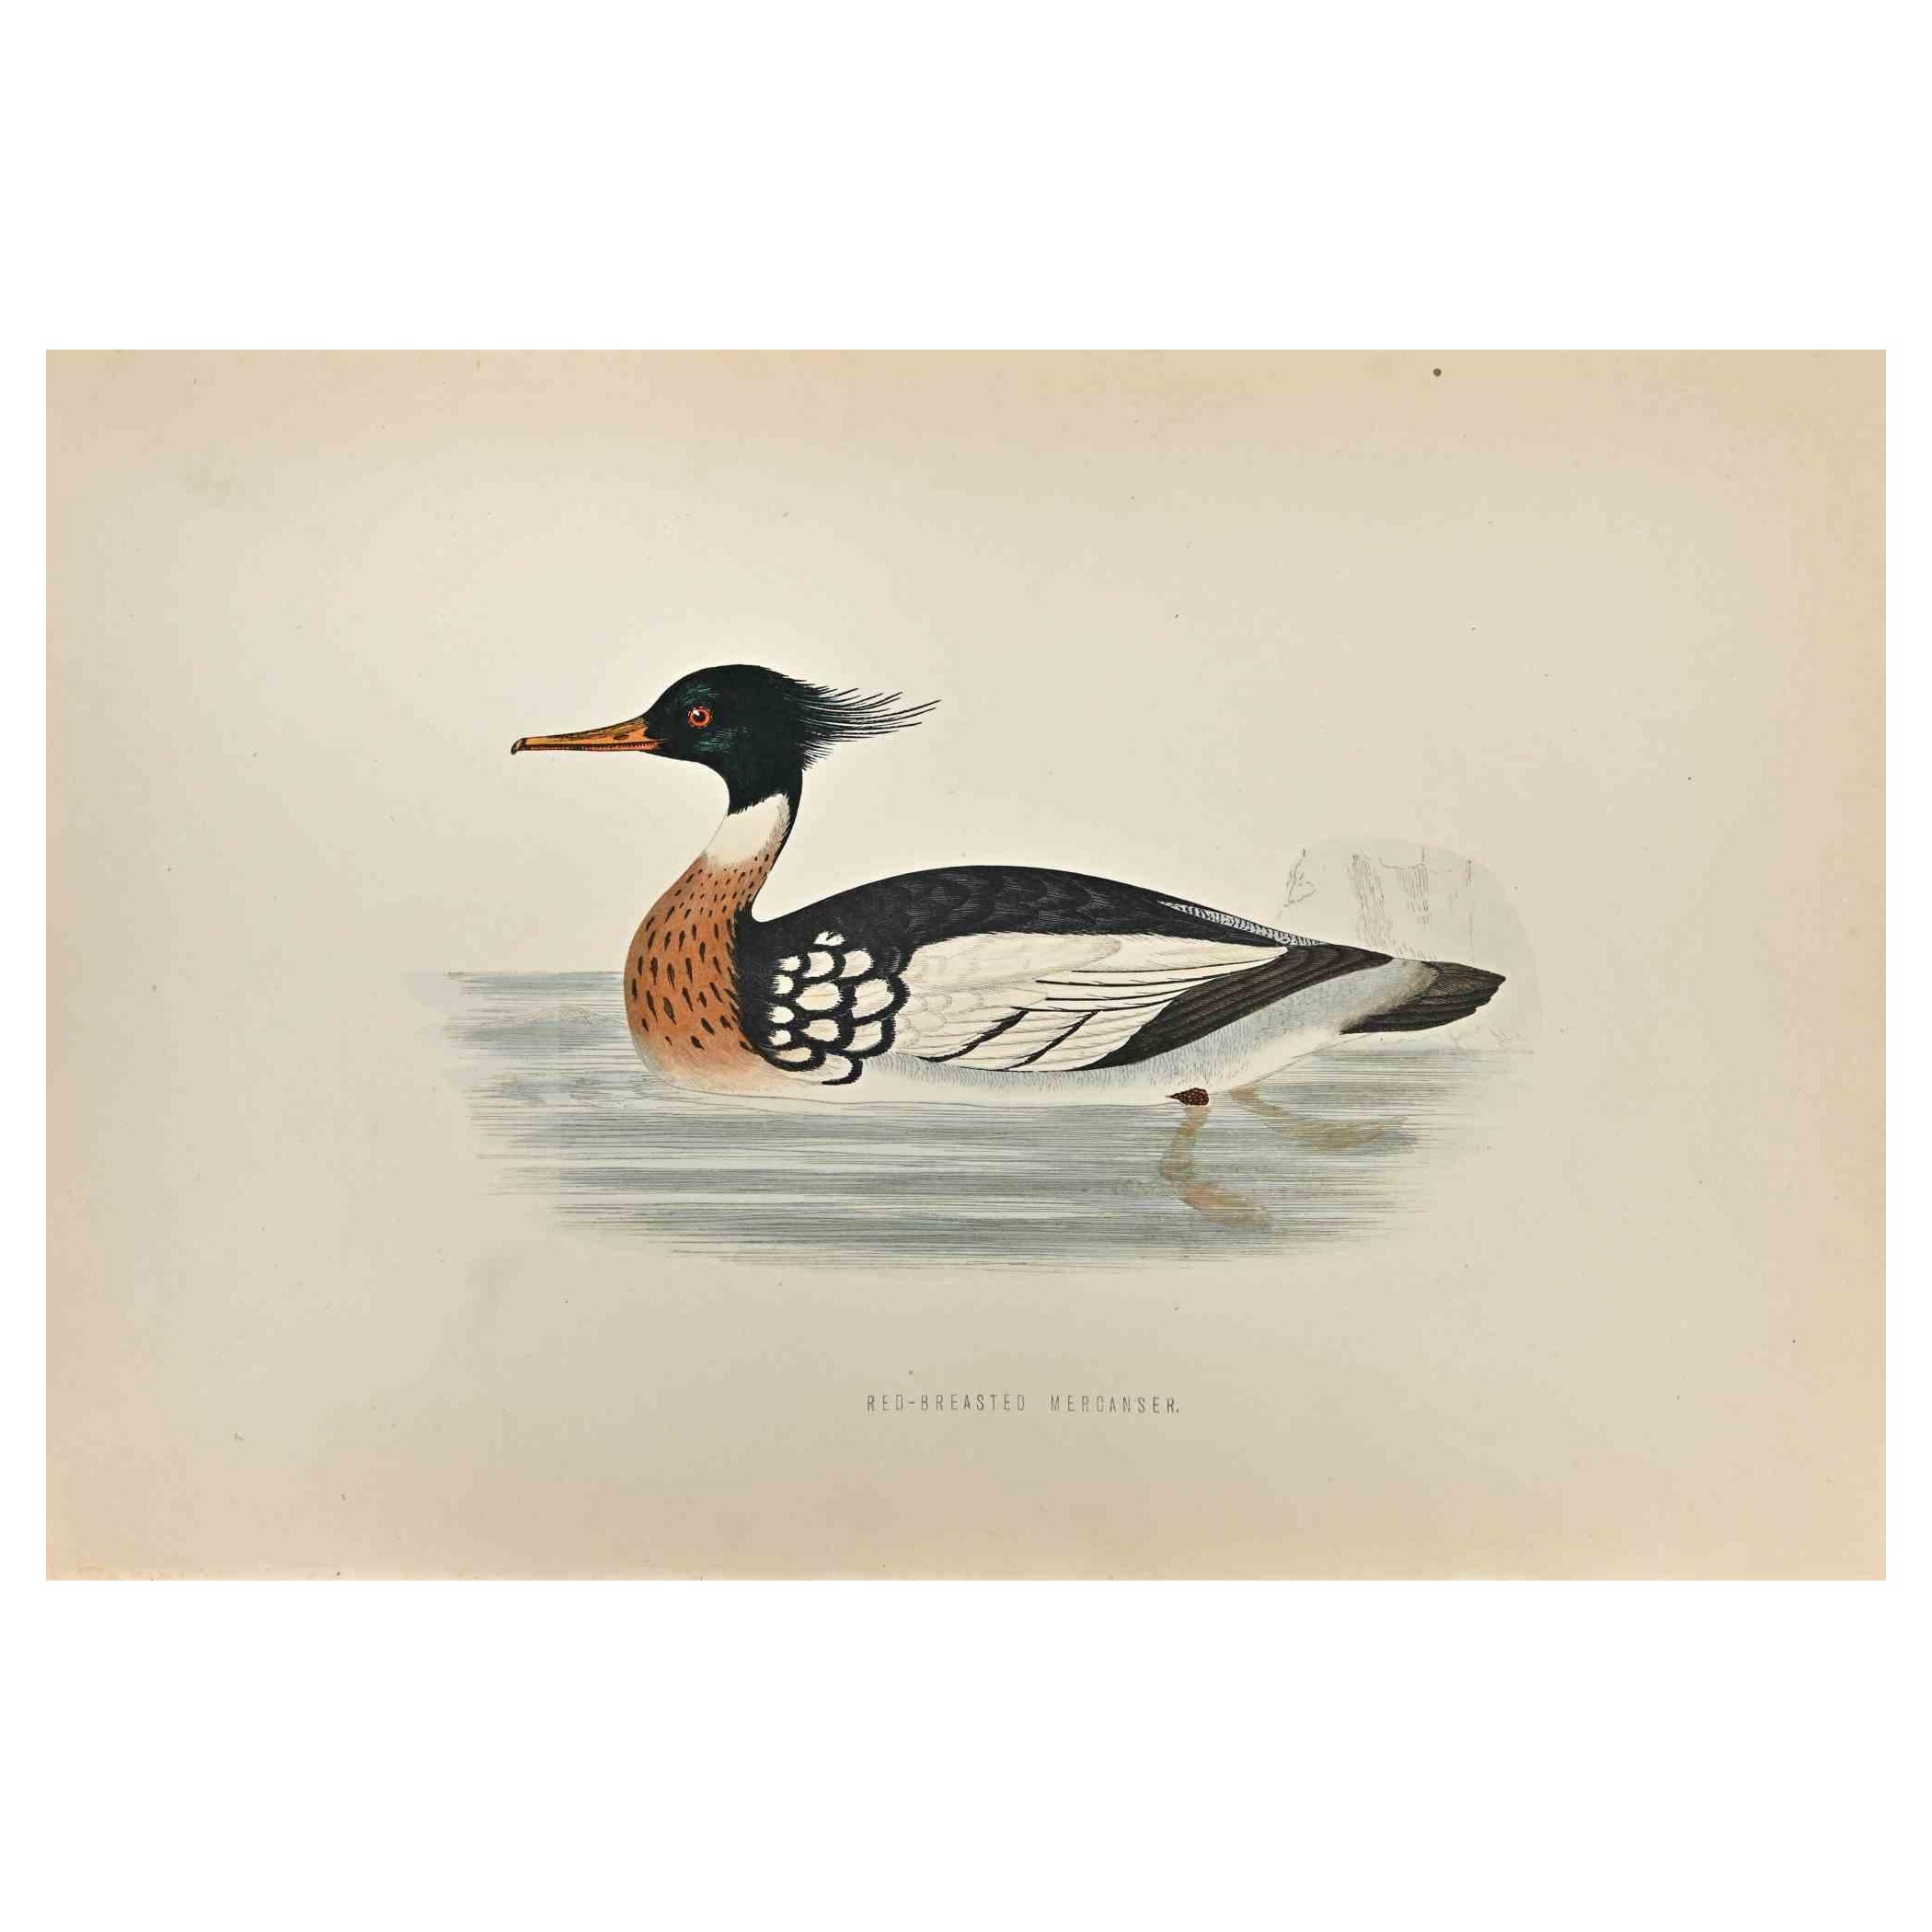 Red-Breasted Merganser is a modern artwork realized in 1870 by the British artist Alexander Francis Lydon (1836-1917) . 

Woodcut print, hand colored, published by London, Bell & Sons, 1870.  Name of the bird printed in plate. This work is part of a